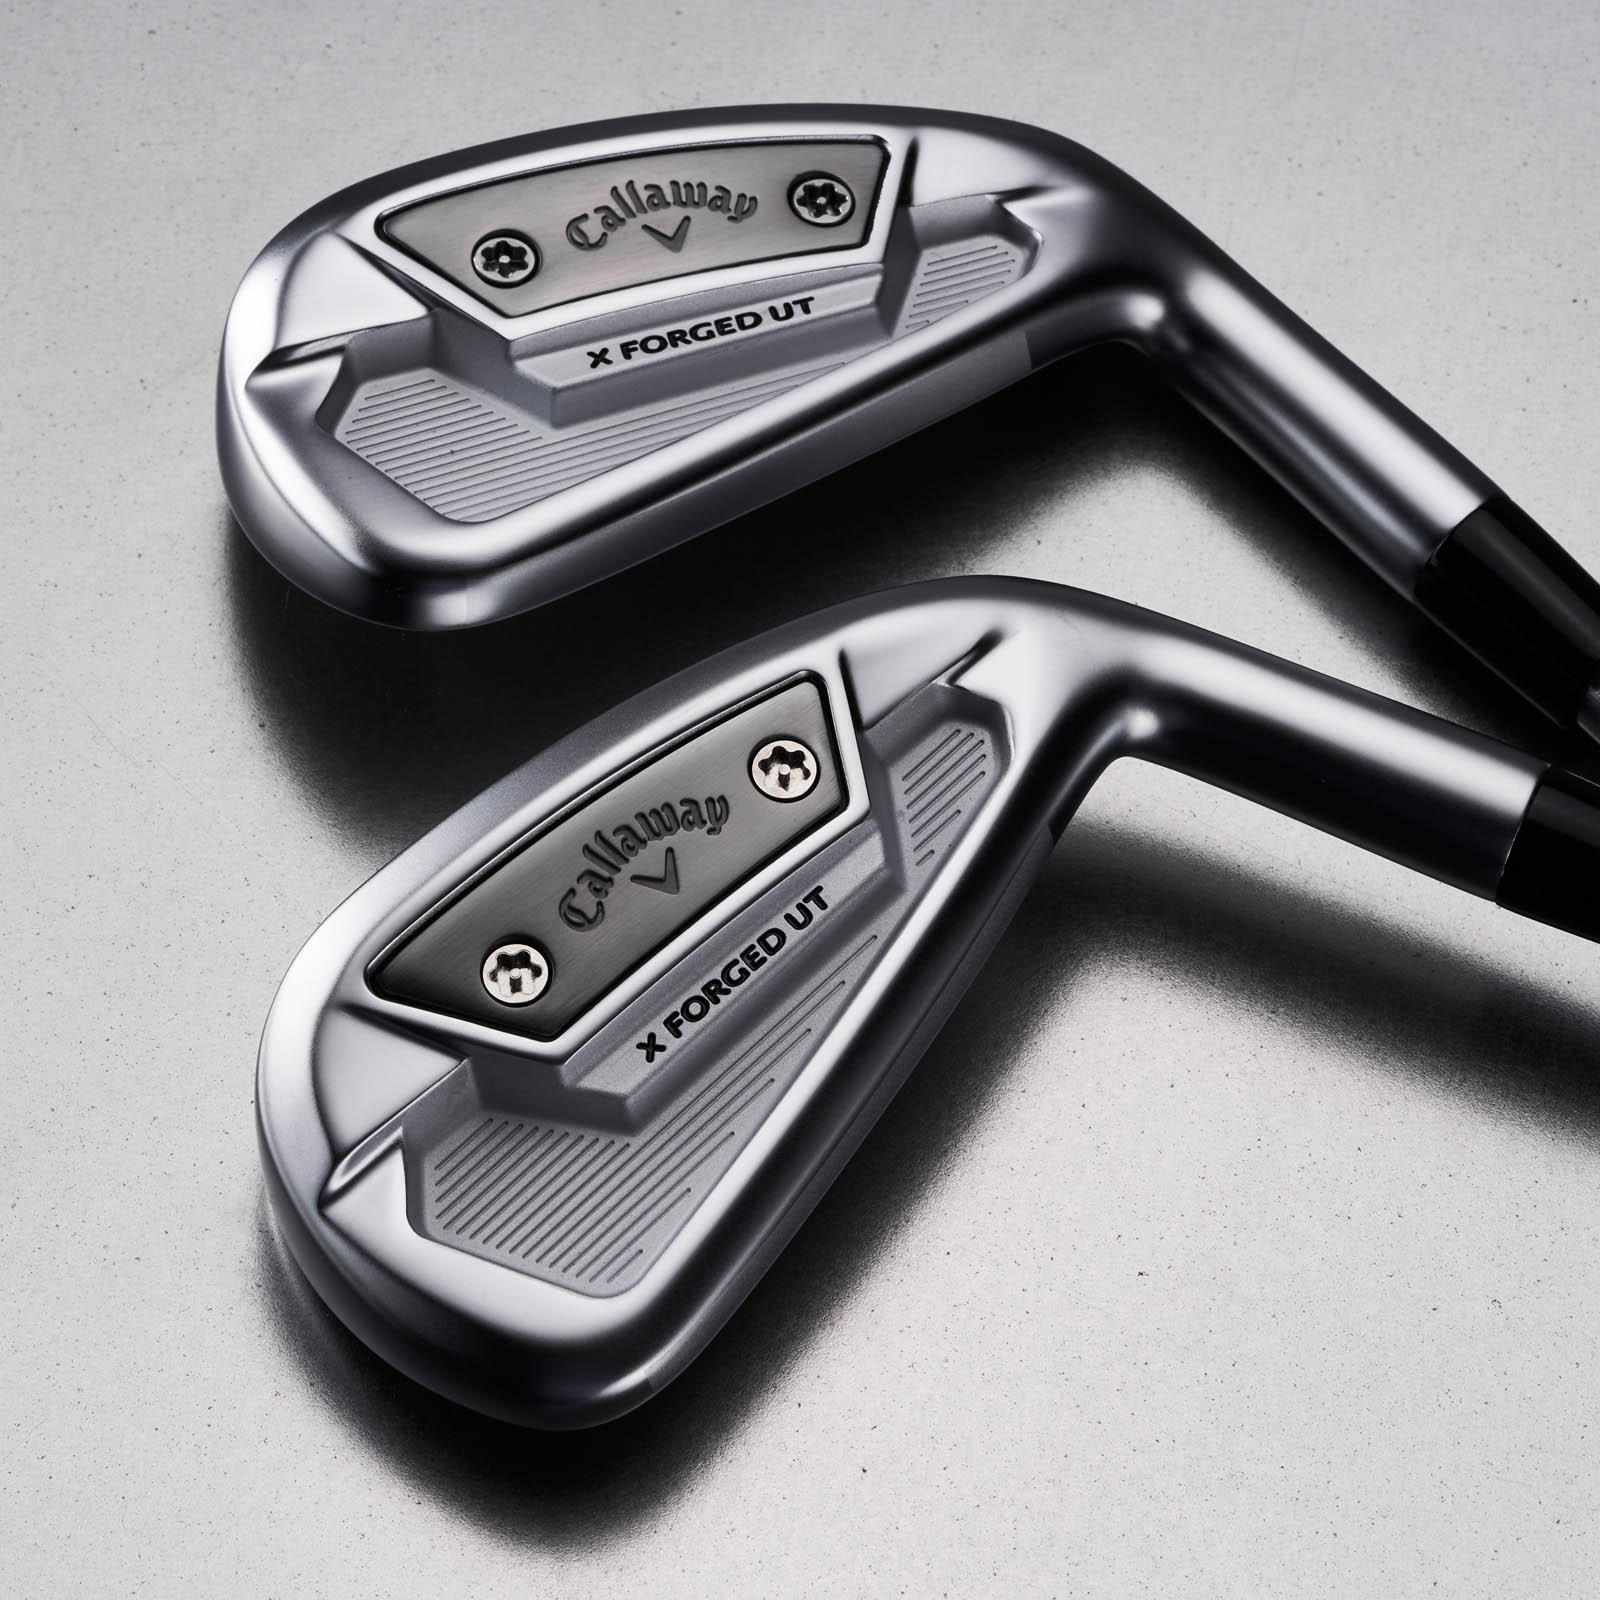 Callaway X Forged Utility Irons